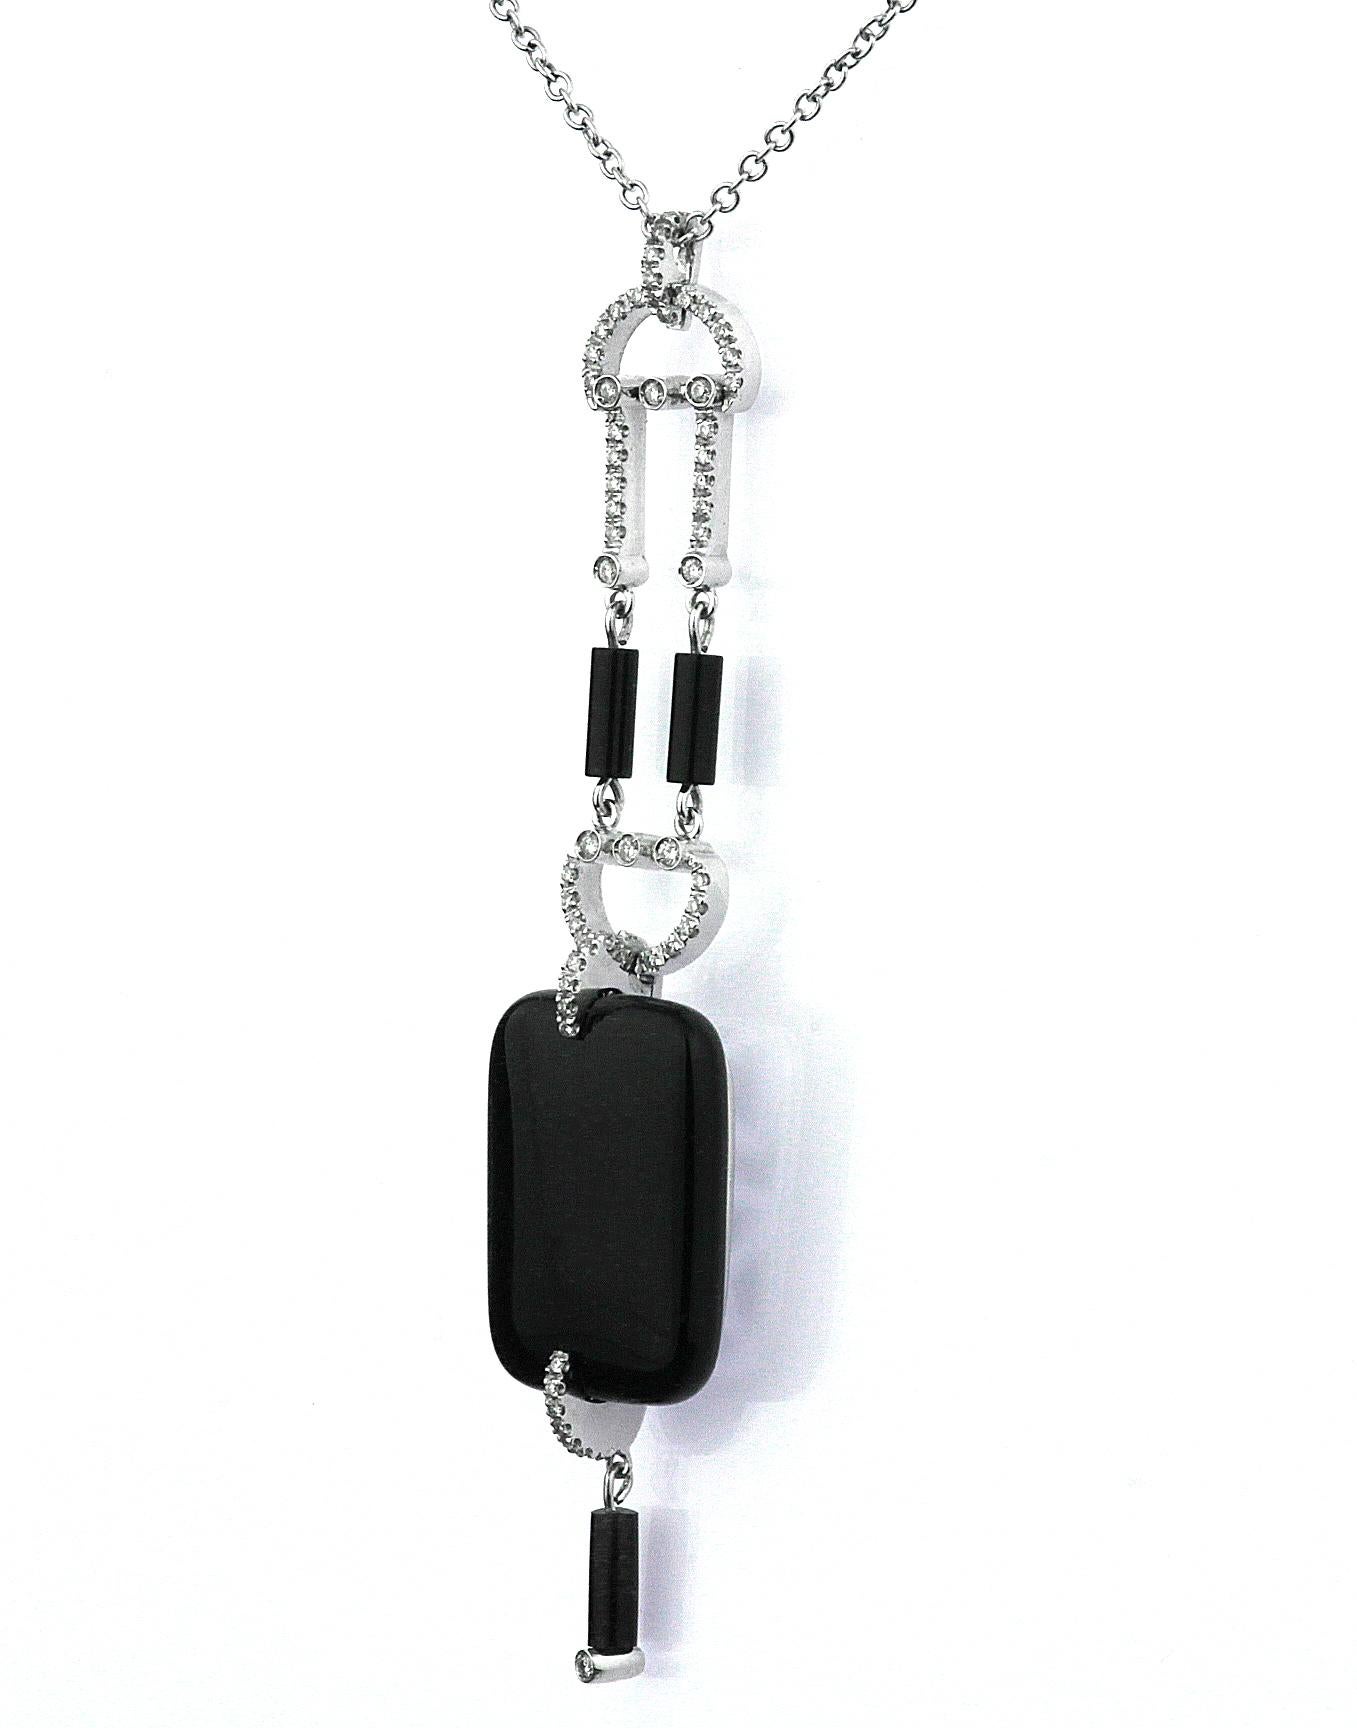 Onyx and Diamond Drop Necklace/Chain with Pendant in 18K White Gold Hallmarked For Sale 2